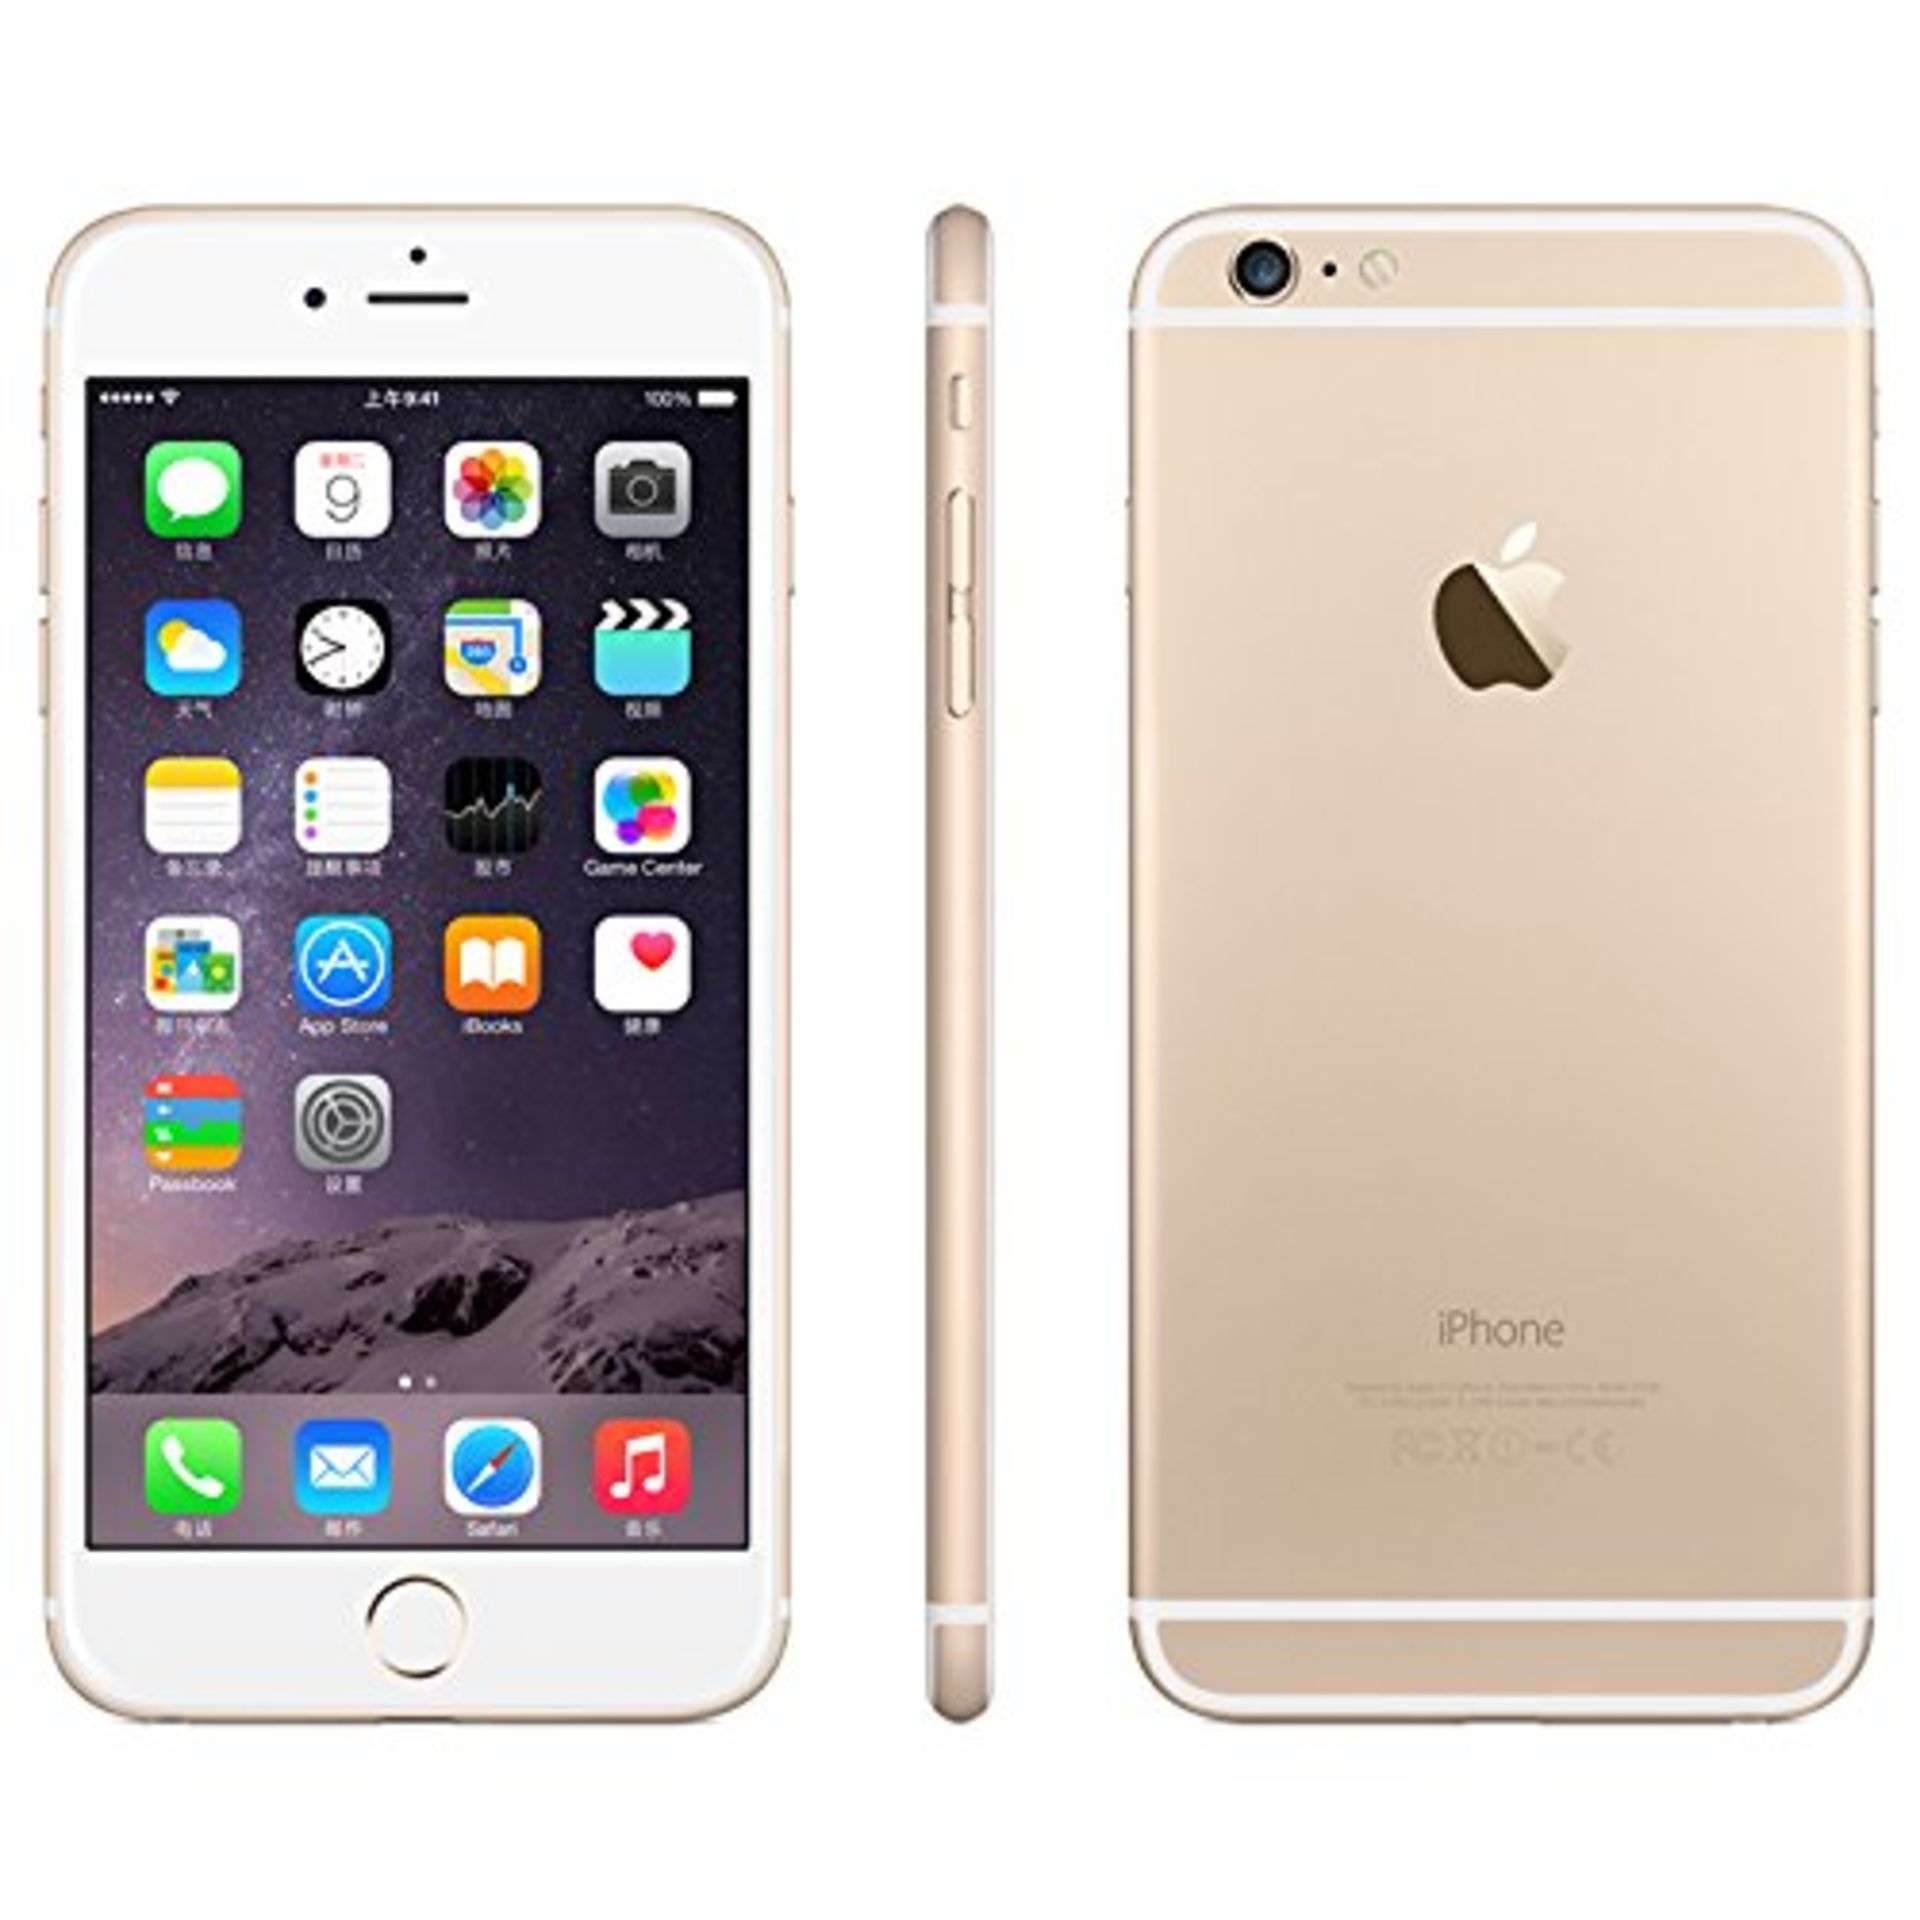 Grade A Apple iphone 6 plus 128GB Colours May Vary Touch ID Item available approx 12 working days